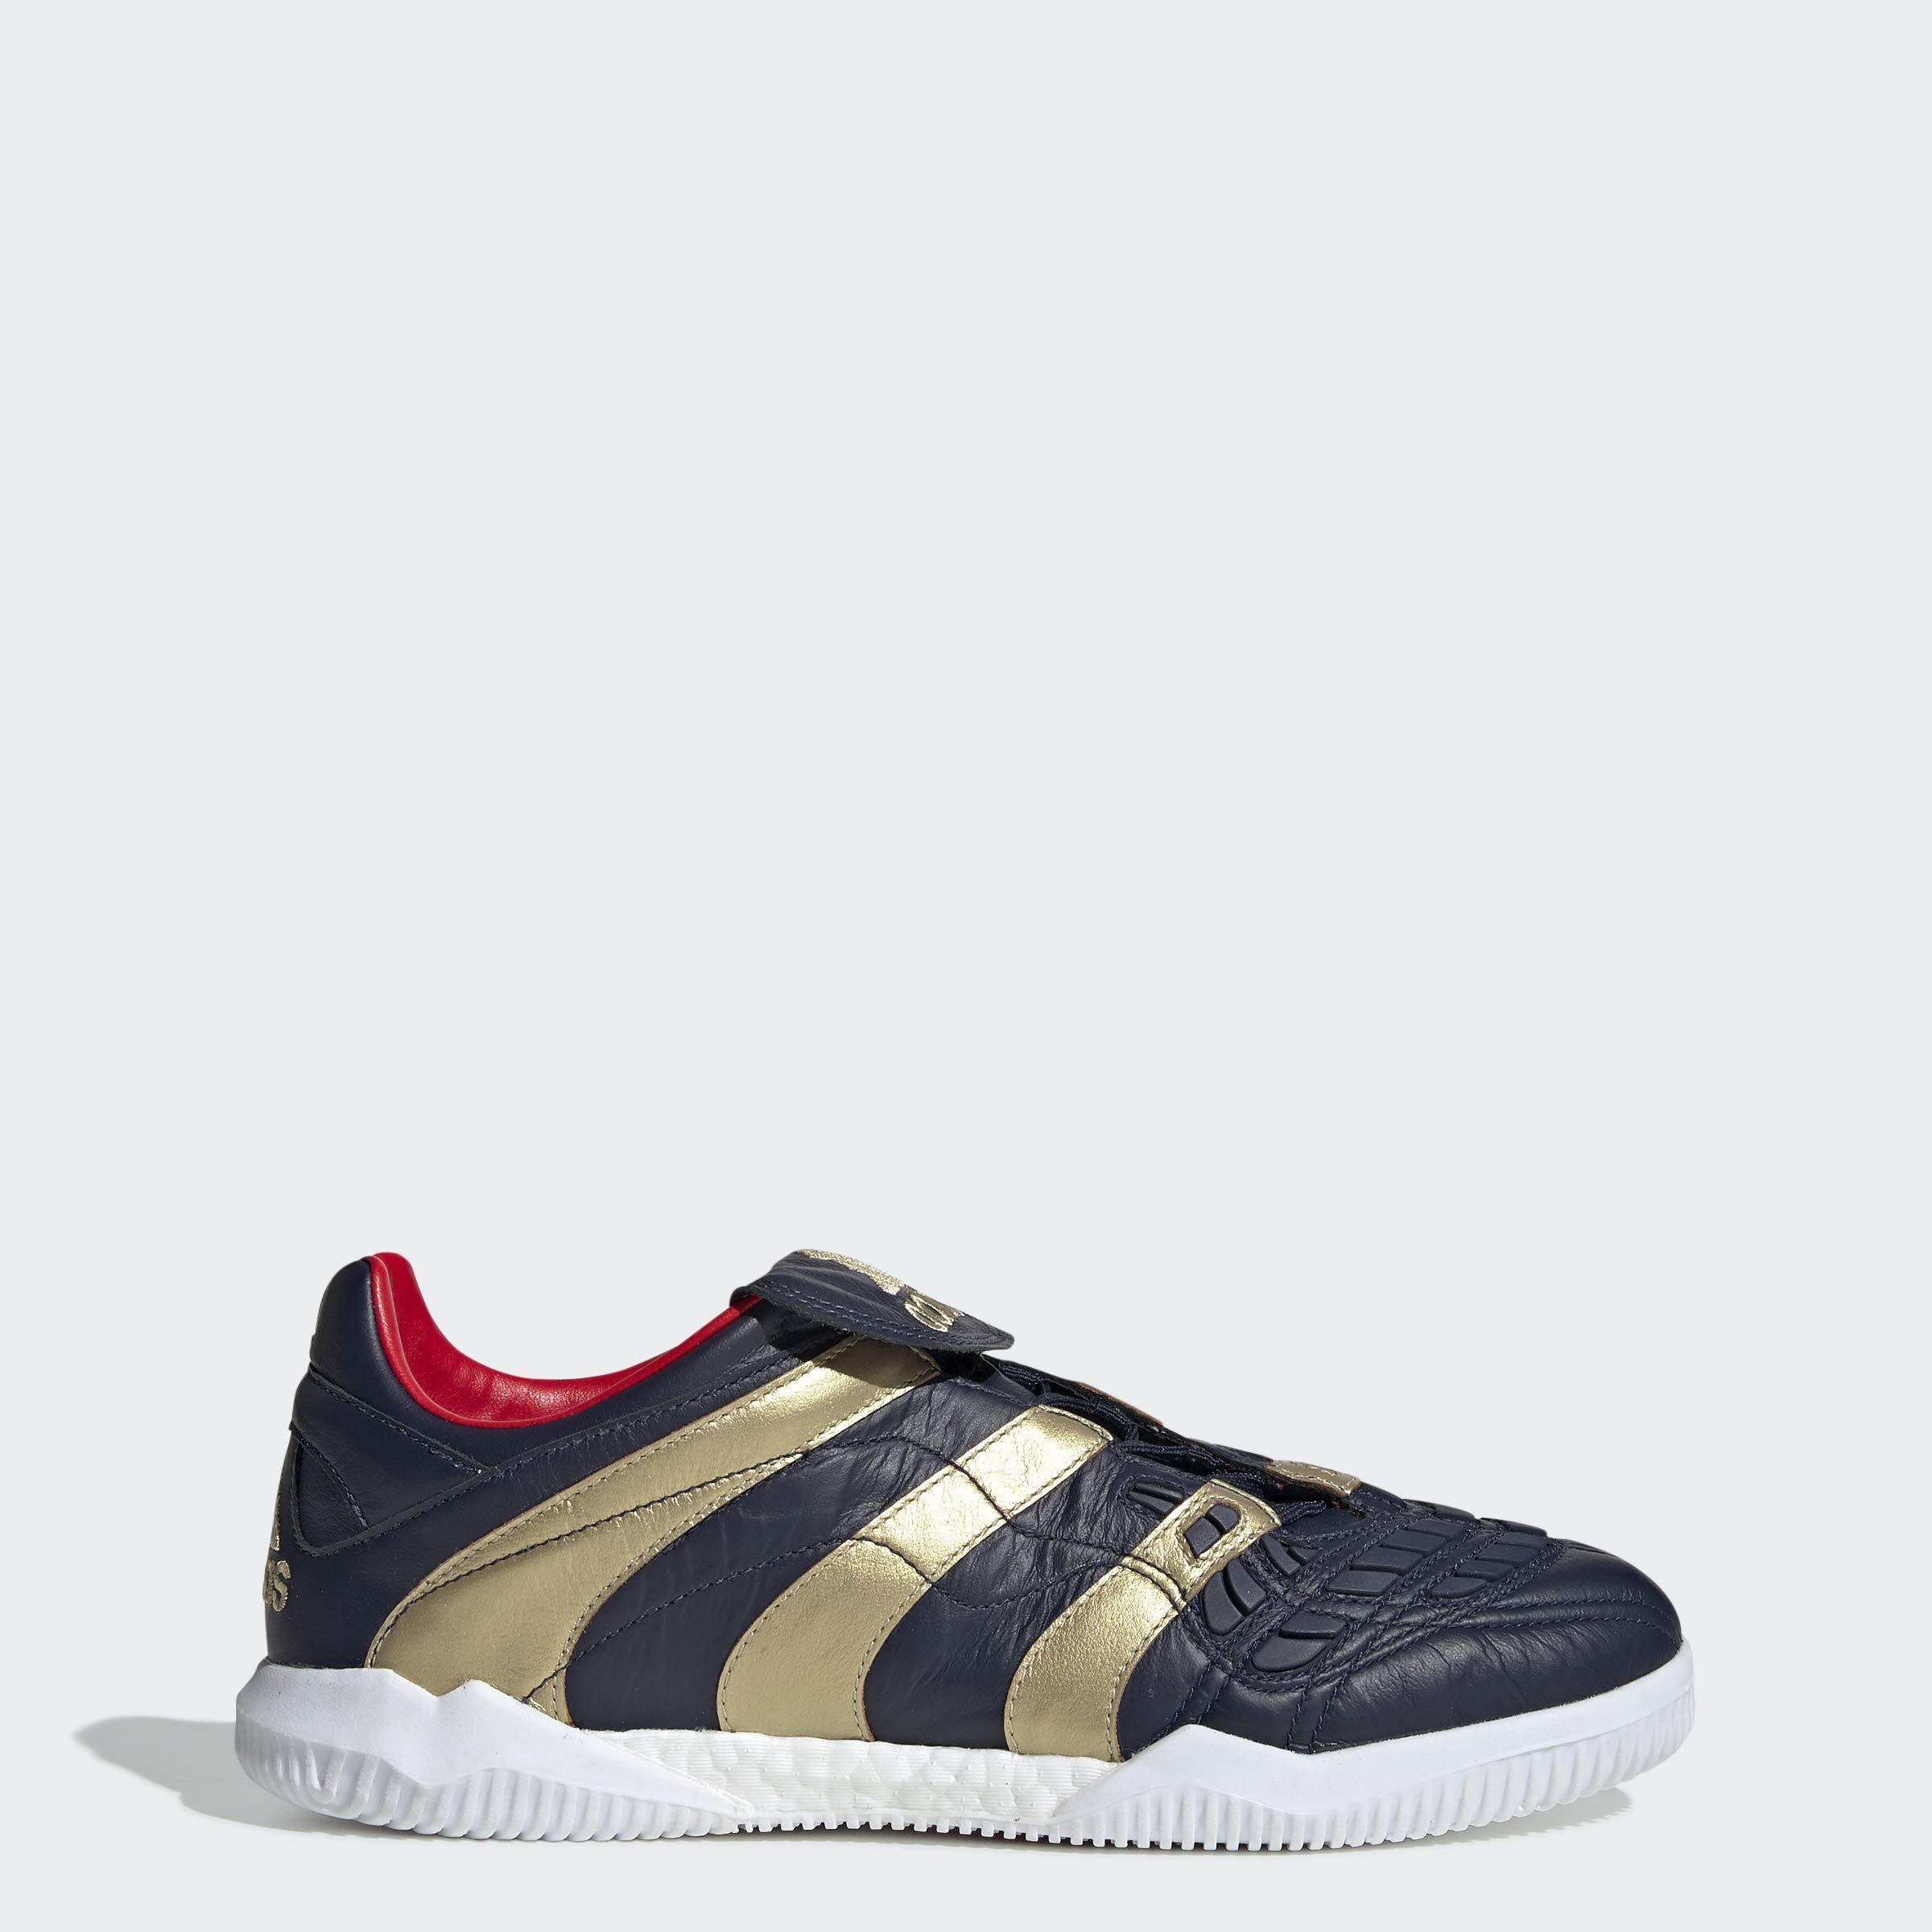 adidas Predator Accelerator Tr 25 Year Pack Zidane in Navy Gold Red (Blue)  for Men - Save 47% - Lyst